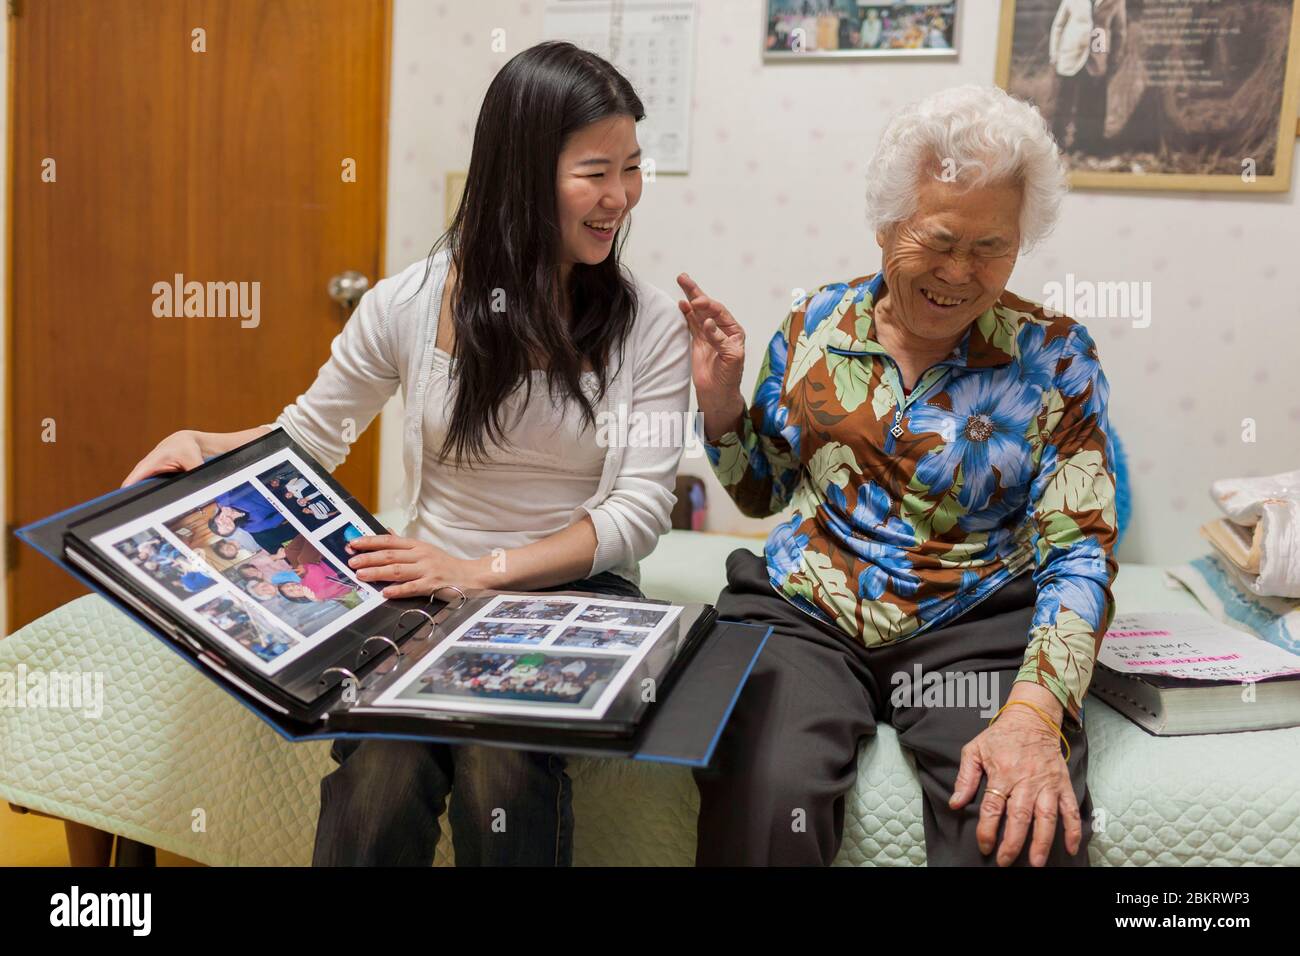 South Korea, Gyeonggi Province, Gwangju, near Seoul, House of Sharing, young Korean woman visits Yi Okseon in her room, meeting with surviving Comfort Women, sex slaves victims of Japanese soldiers, during pic